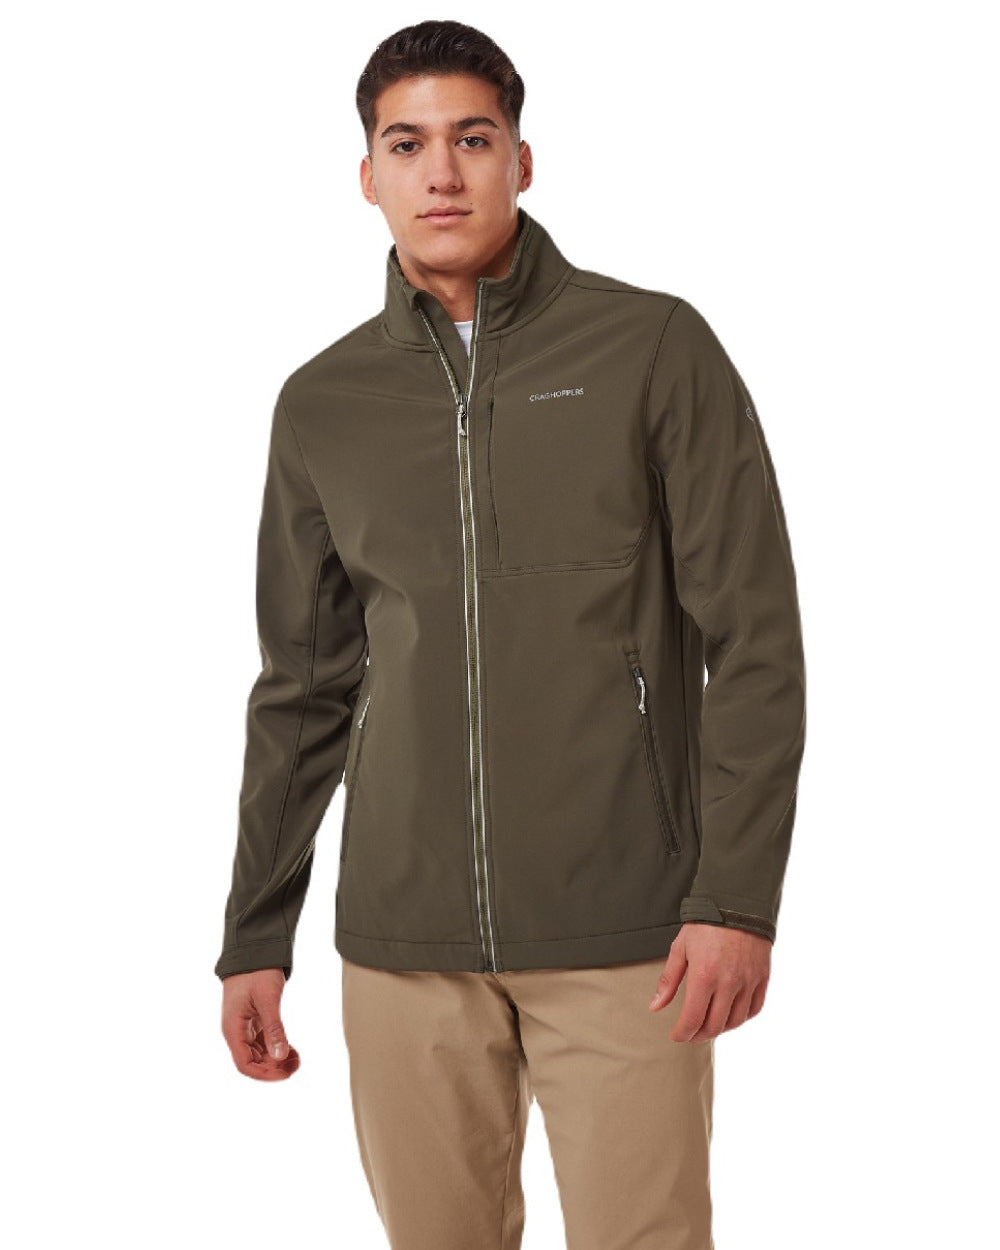 Woodland Green Coloured Craghoppers Altis Jacket On A White Background 